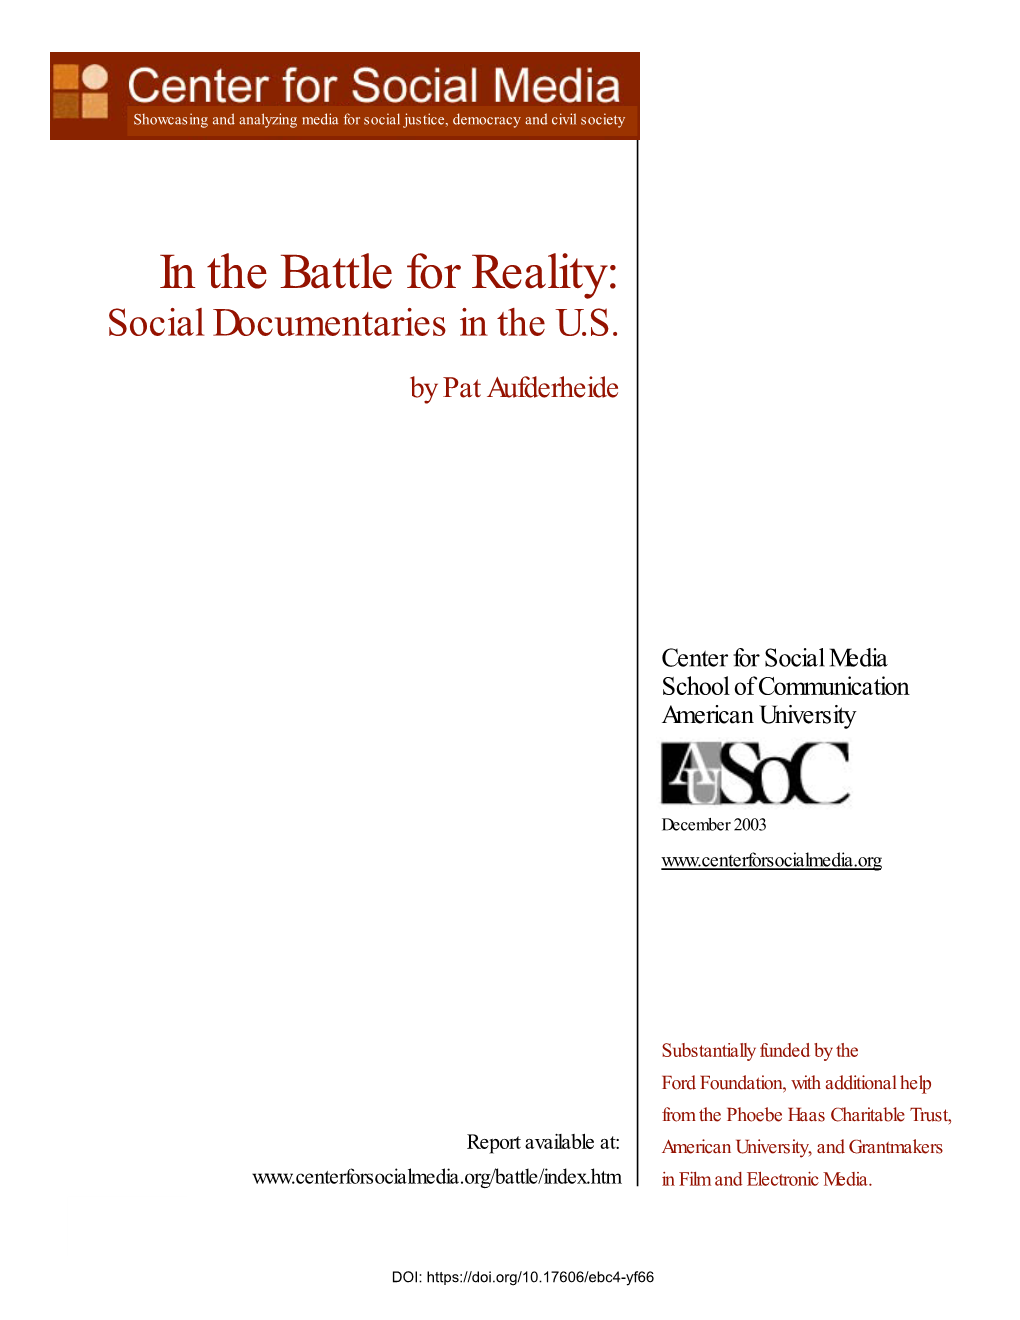 In the Battle for Reality: Social Documentaries in the U.S. by Pat Aufderheide